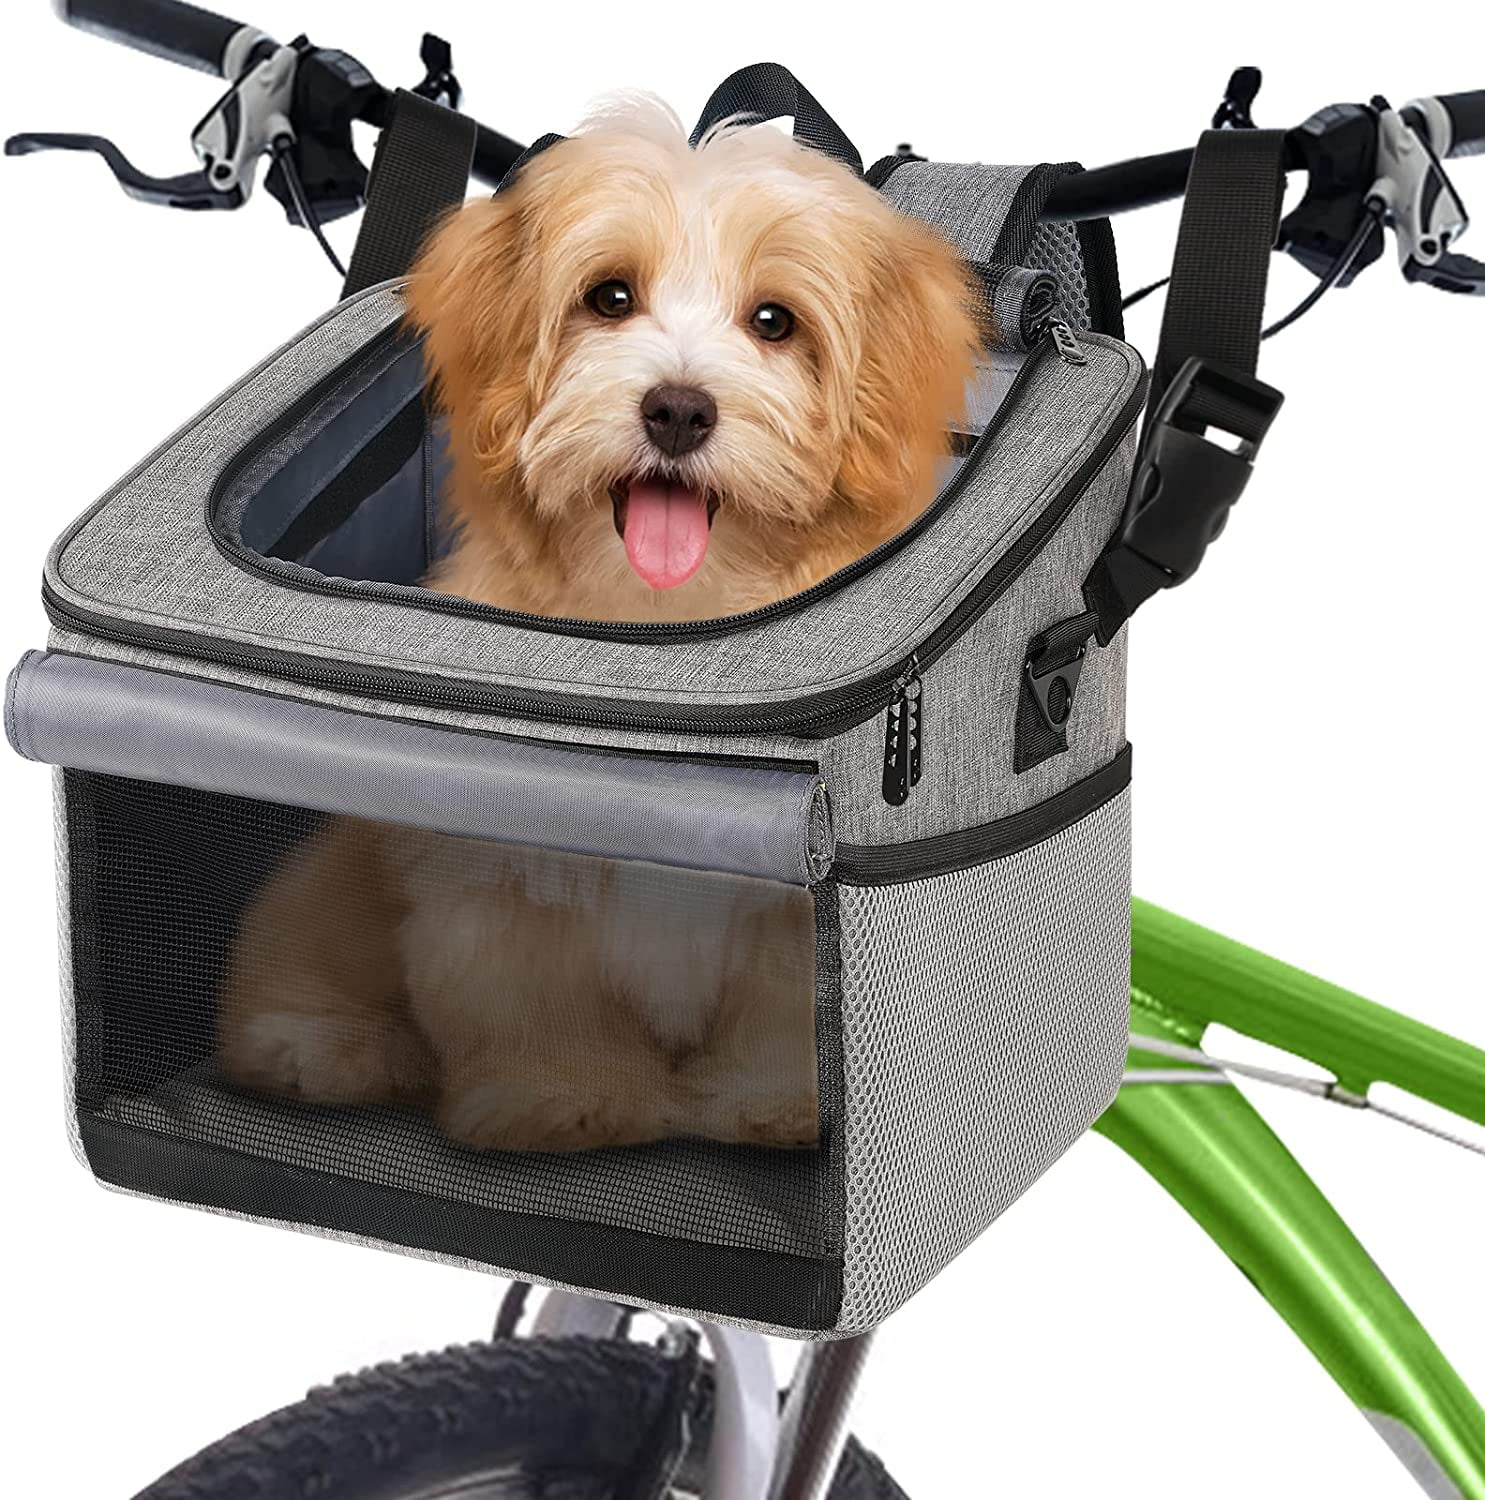 RAYMACE Dog Bike Basket Bag with Reflective Stripe Bicycle Pet Carrier Backpacks for Cats,Happy Travel with Your Pet 